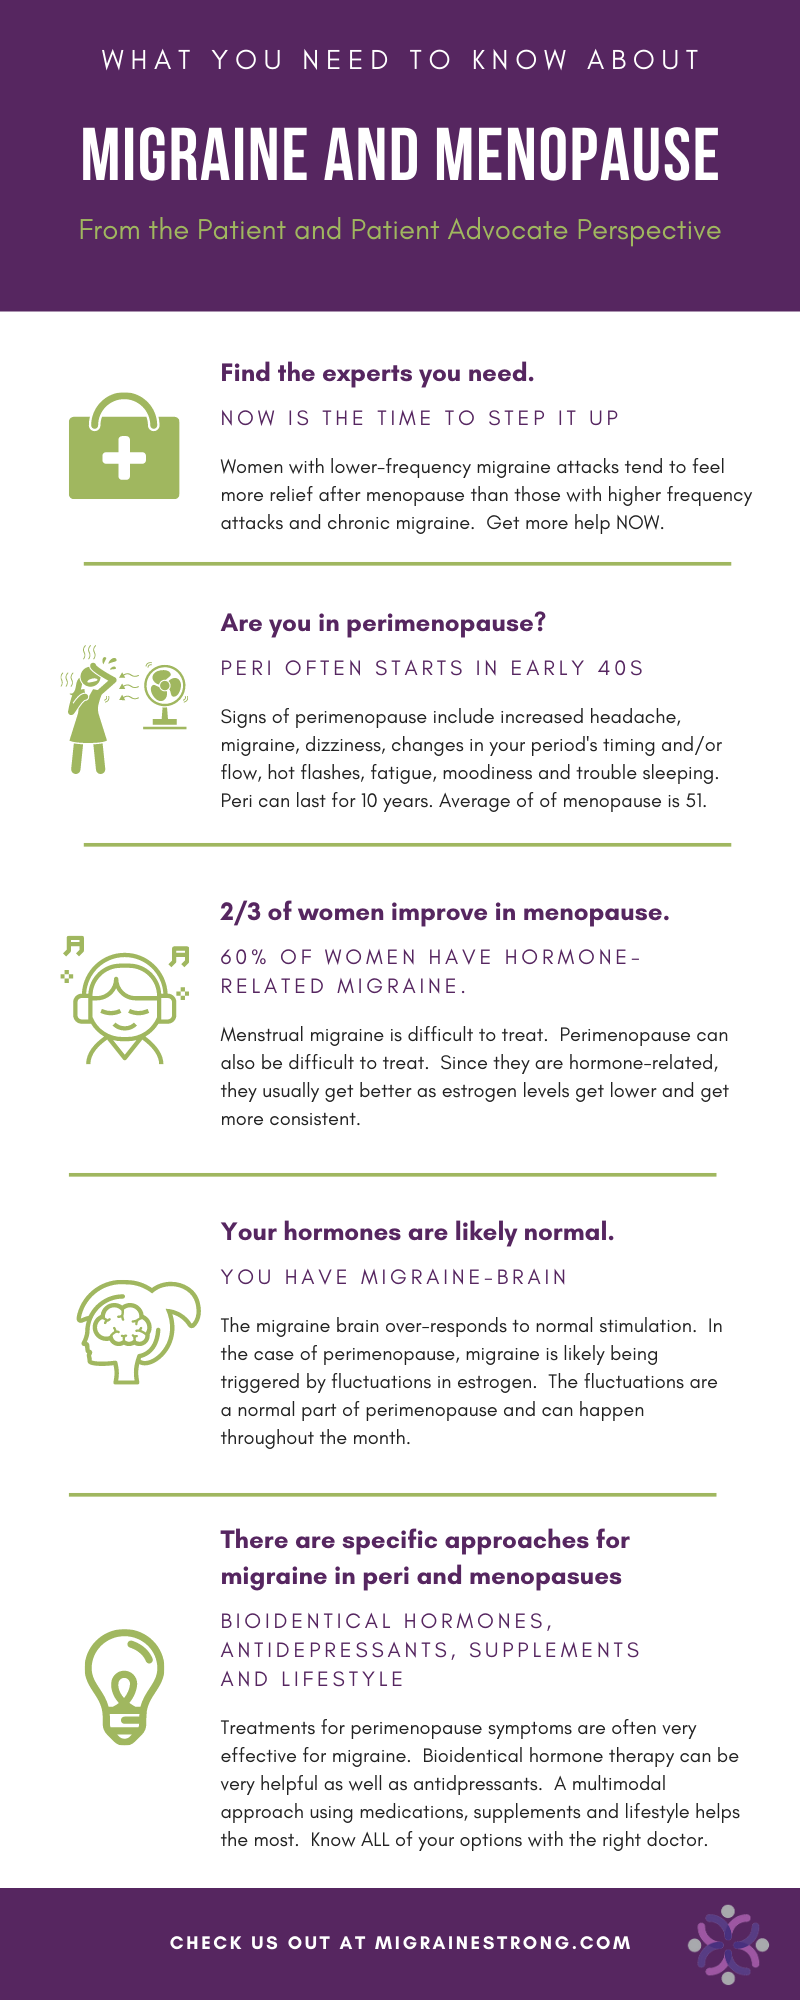 What No One Tells You about Migraines and Menopause (and